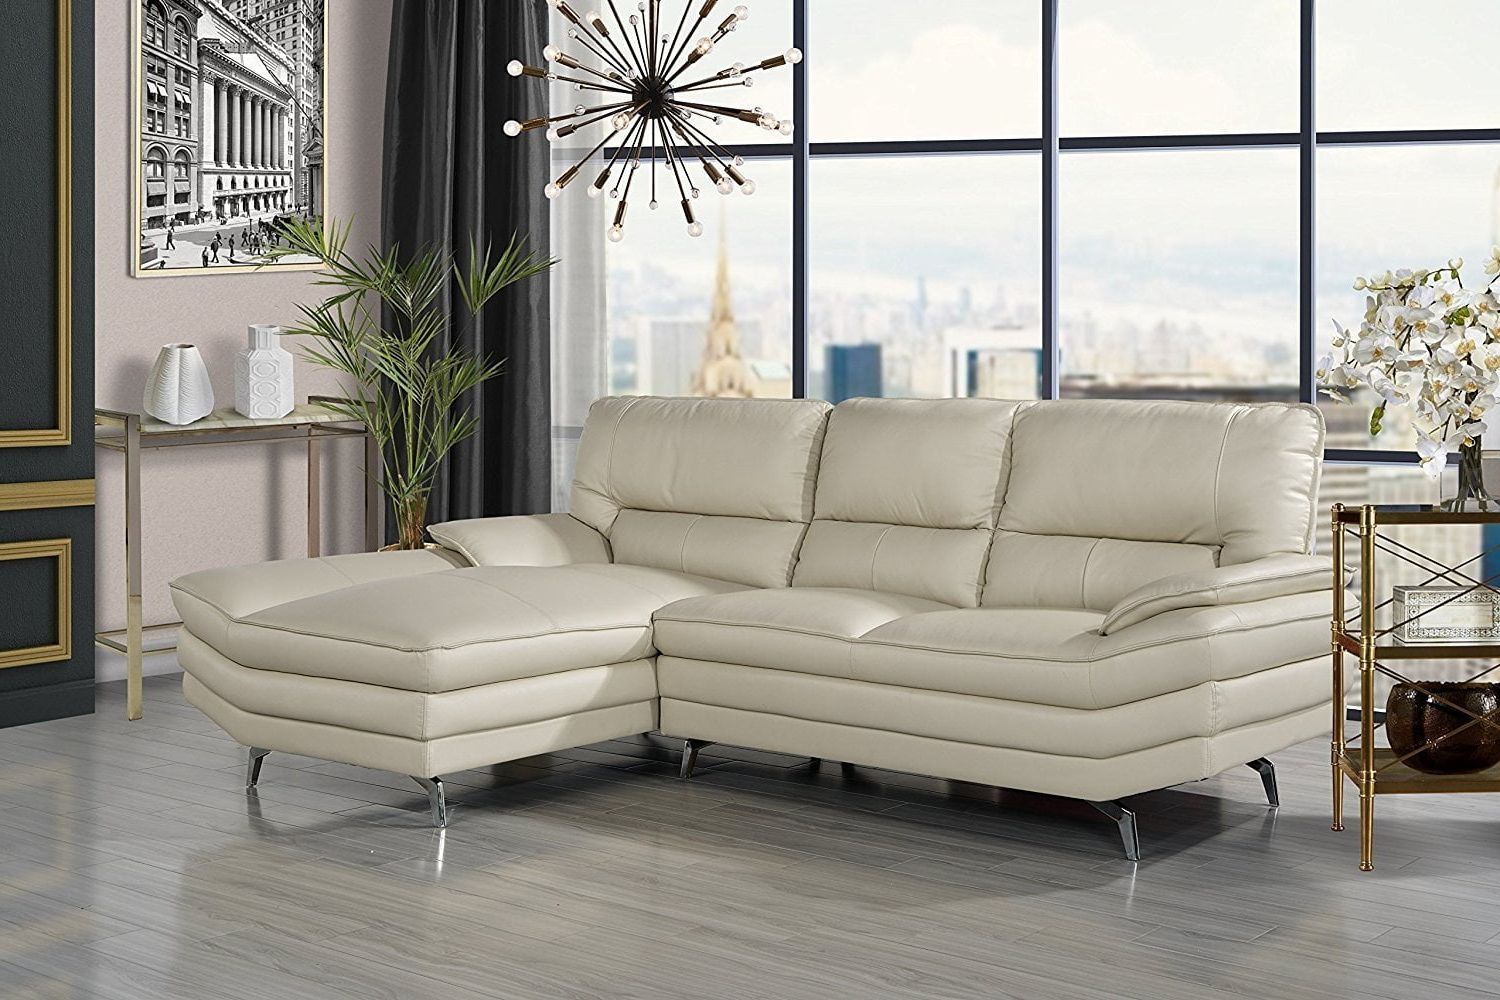 Living Room Leather Sectional Sofa, L Shape Couch With Chaise Lounge Throughout Most Current Beige L Shaped Sectional Sofas (View 13 of 15)